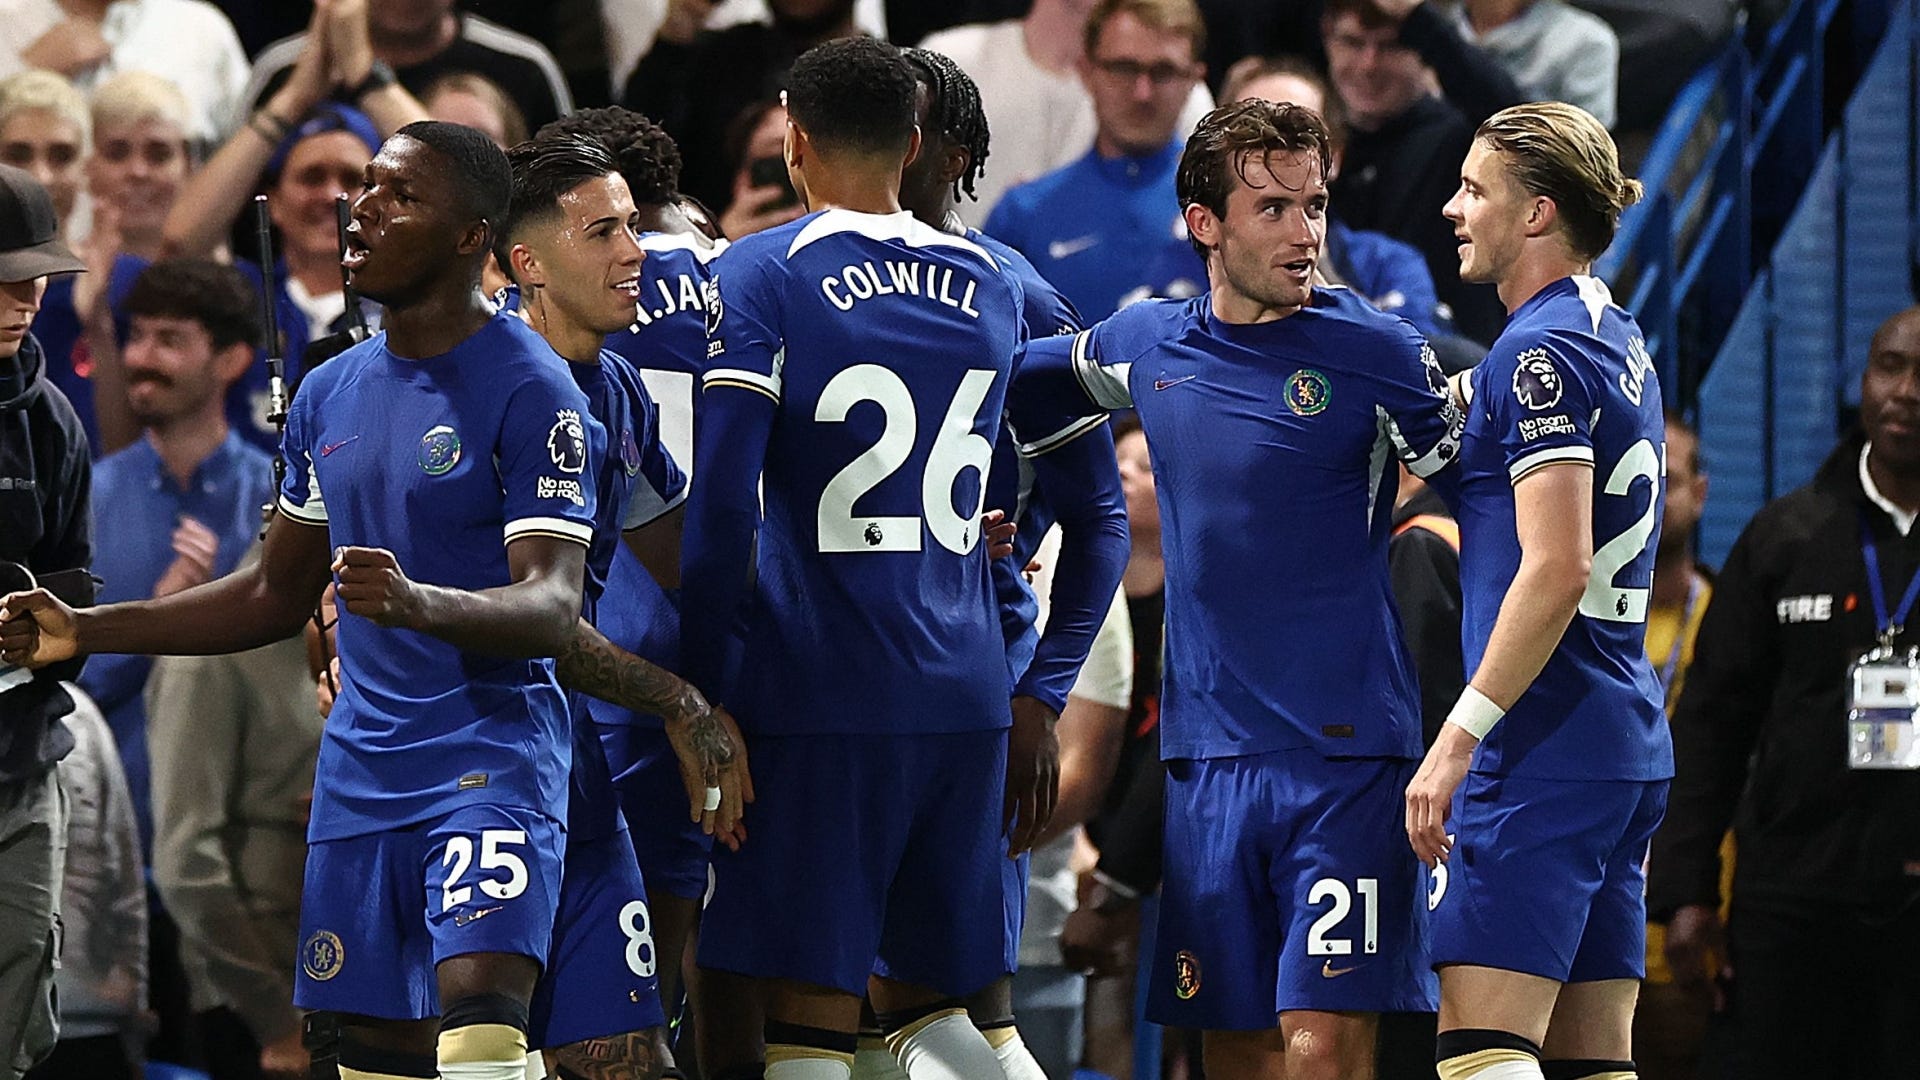 Chelsea vs Wimbledon Live stream, TV channel, kick-off time and where to watch Goal UK